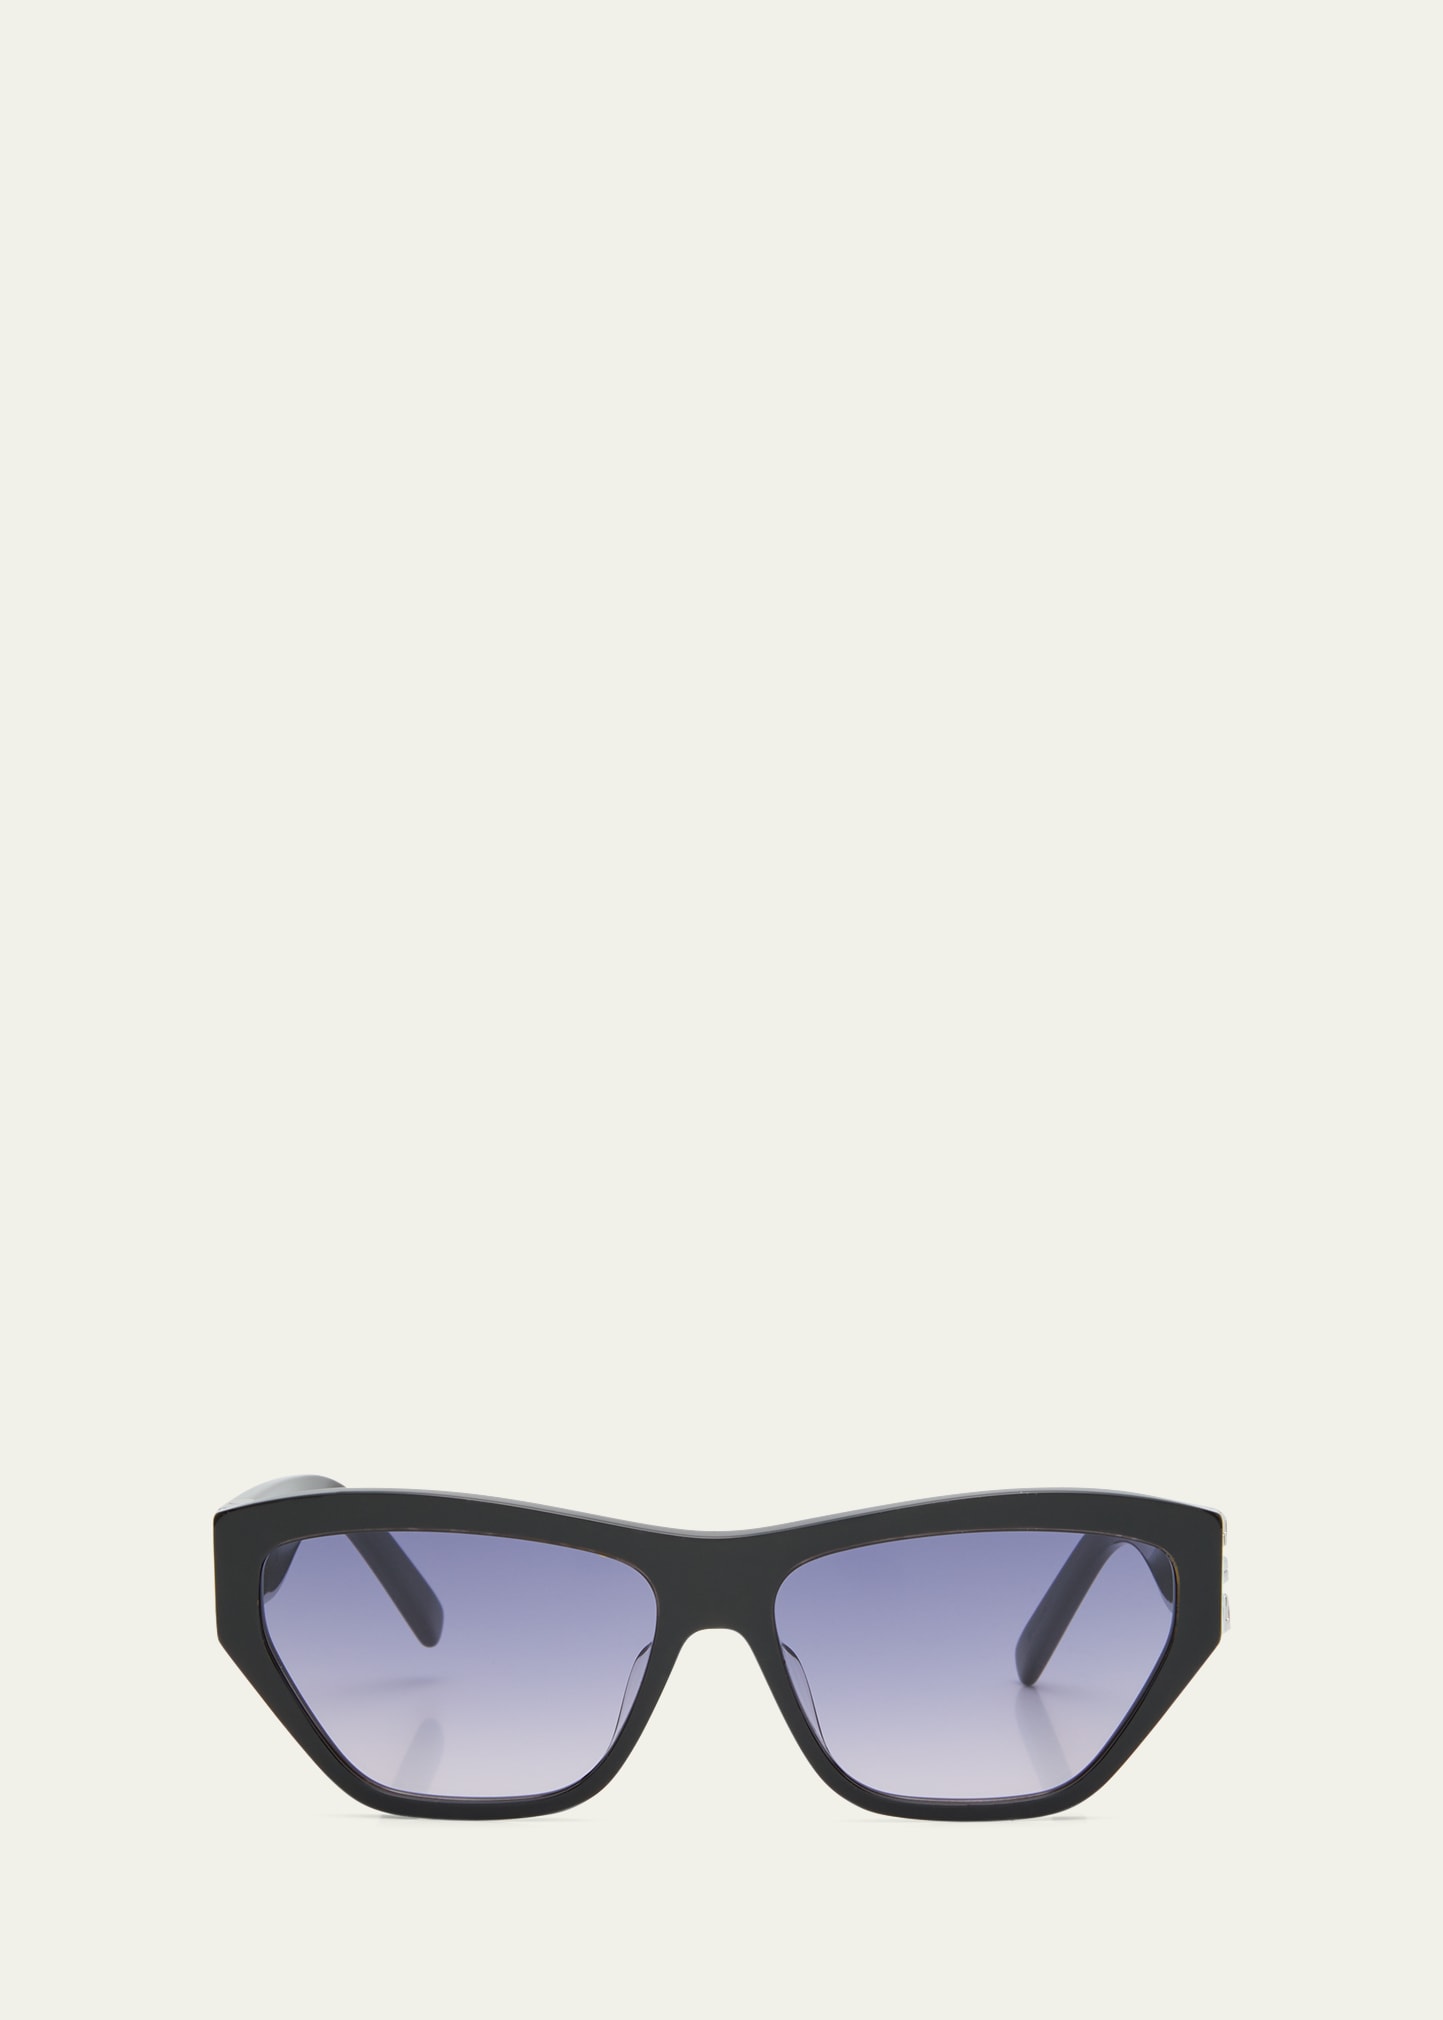 Givenchy 4g Acetate & Metal Cat-eye Sunglasses In Black Violet